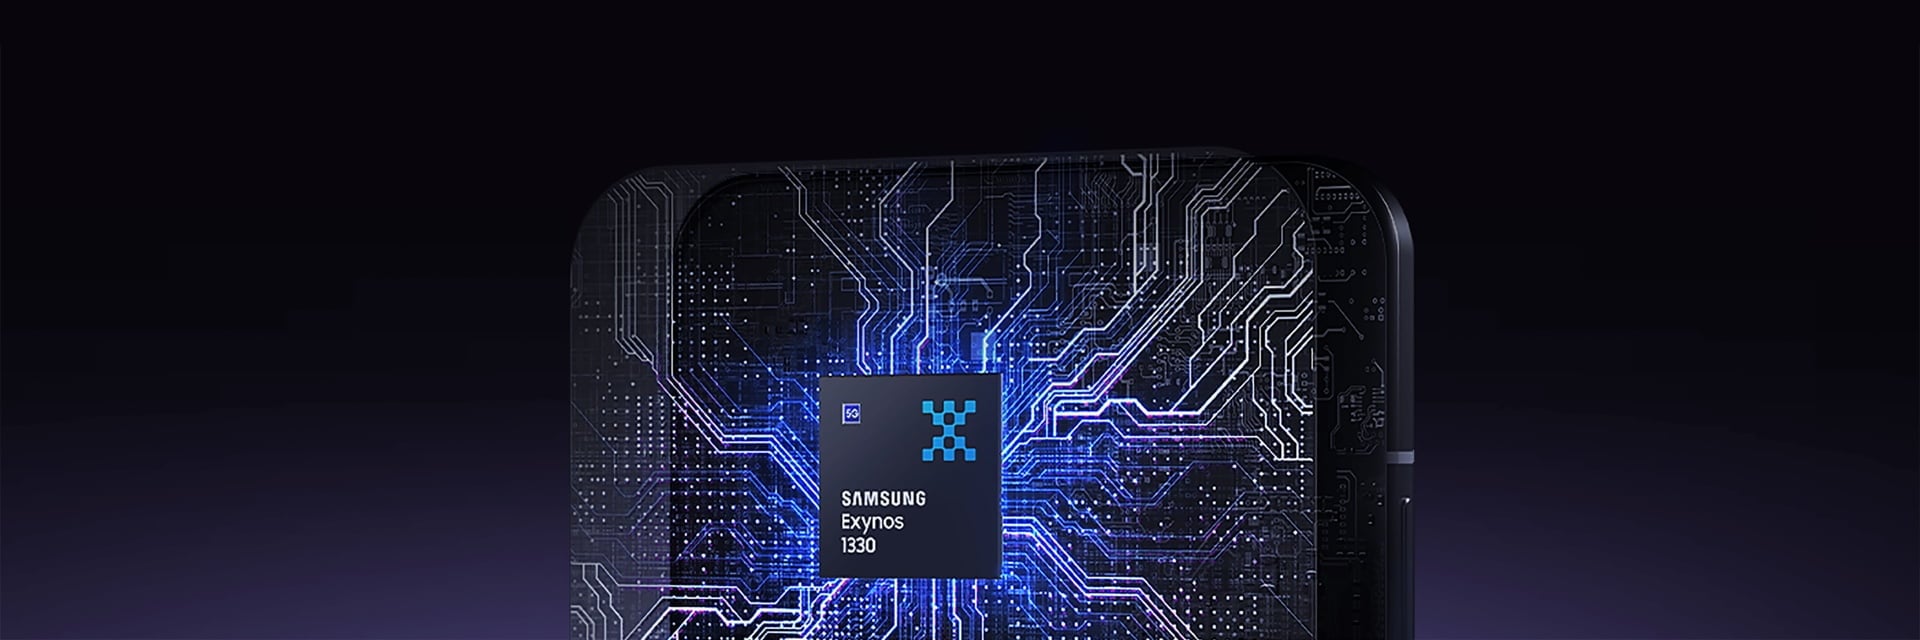 There is a blue indirect light shining behind the Exynos 1330 chip, and there is an image of several lines connected together on the main board around the lighting to represent the uplifted performance of the Exynos 1330